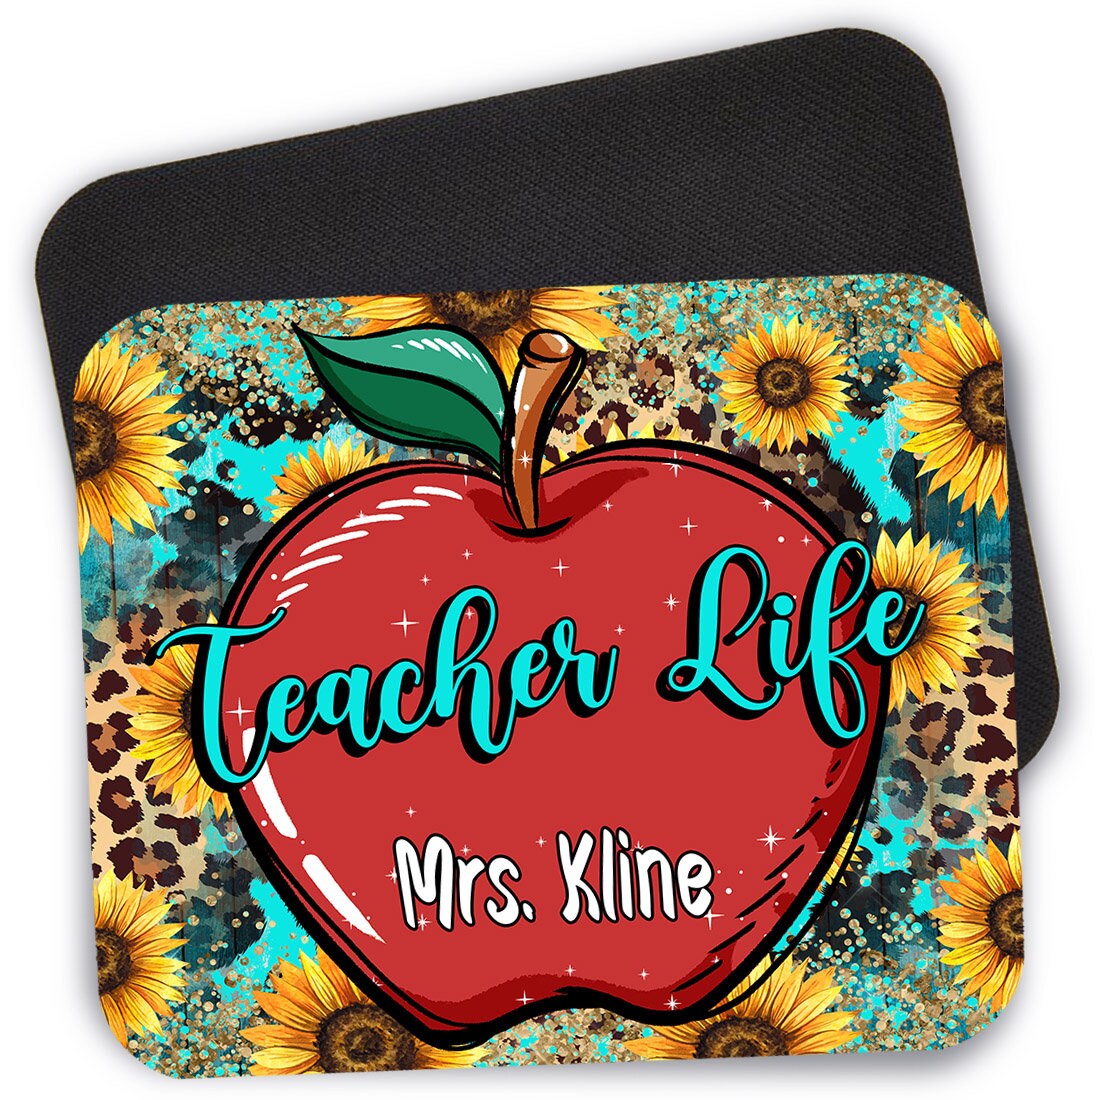 Personalized Western Teacher Mouse Pad, 9.4" x 7.9" Teacher Life Sunflower Mouse Pad, Student Teacher Gift, End of Year Teacher Appreciation